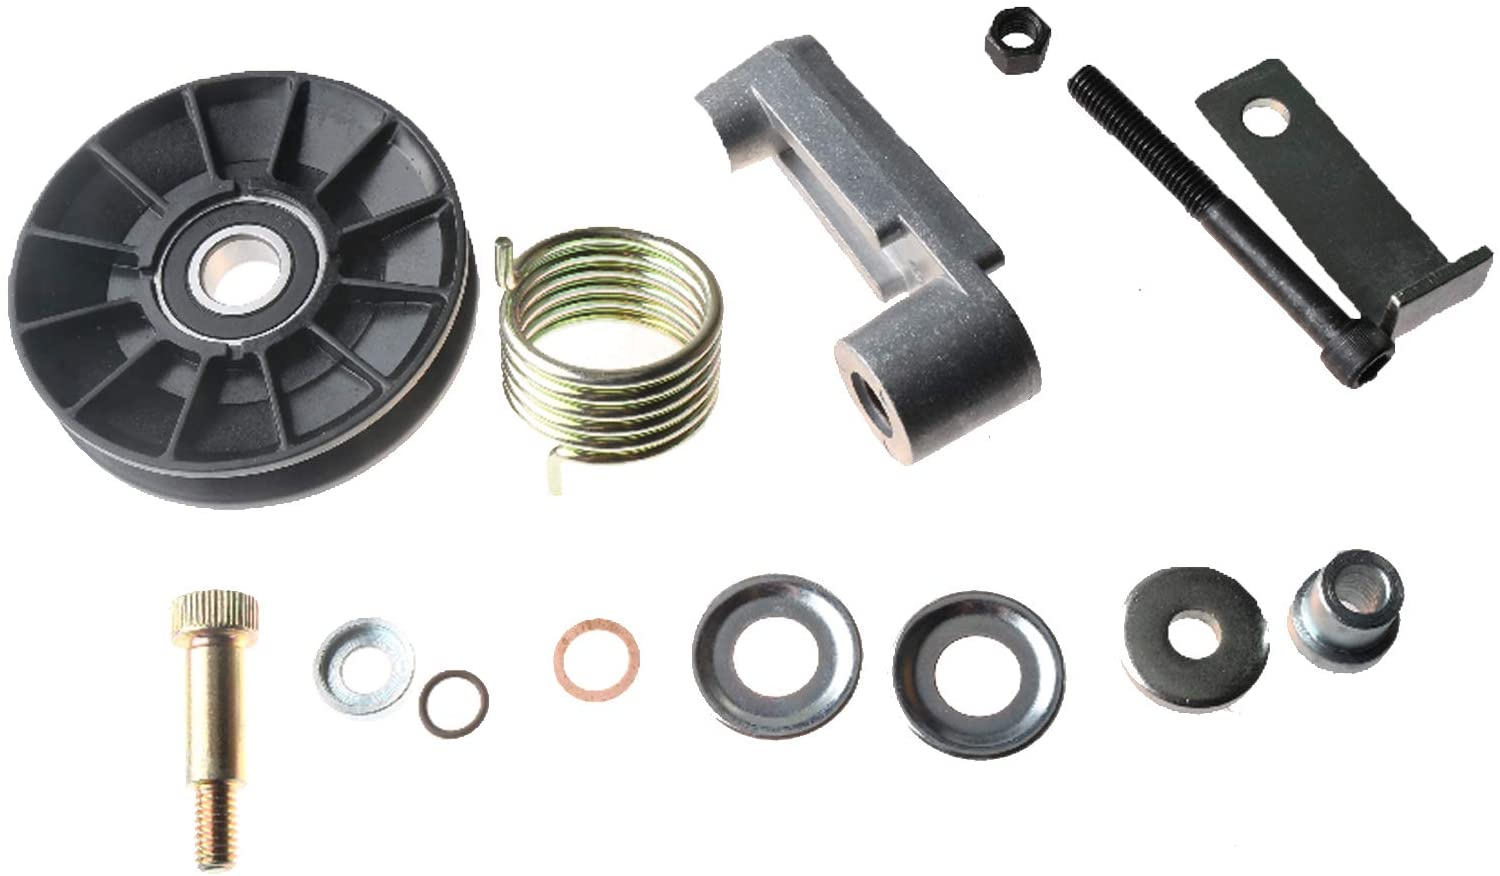 Drive Belt Tensioner 6735884 & Cooling Fan Pulley Kits 6662997 for Bobcat 653 751 753 763 773 7753 S130 S150 S160 S175 S185 S205 T140 T180 T190 - KUDUPARTS